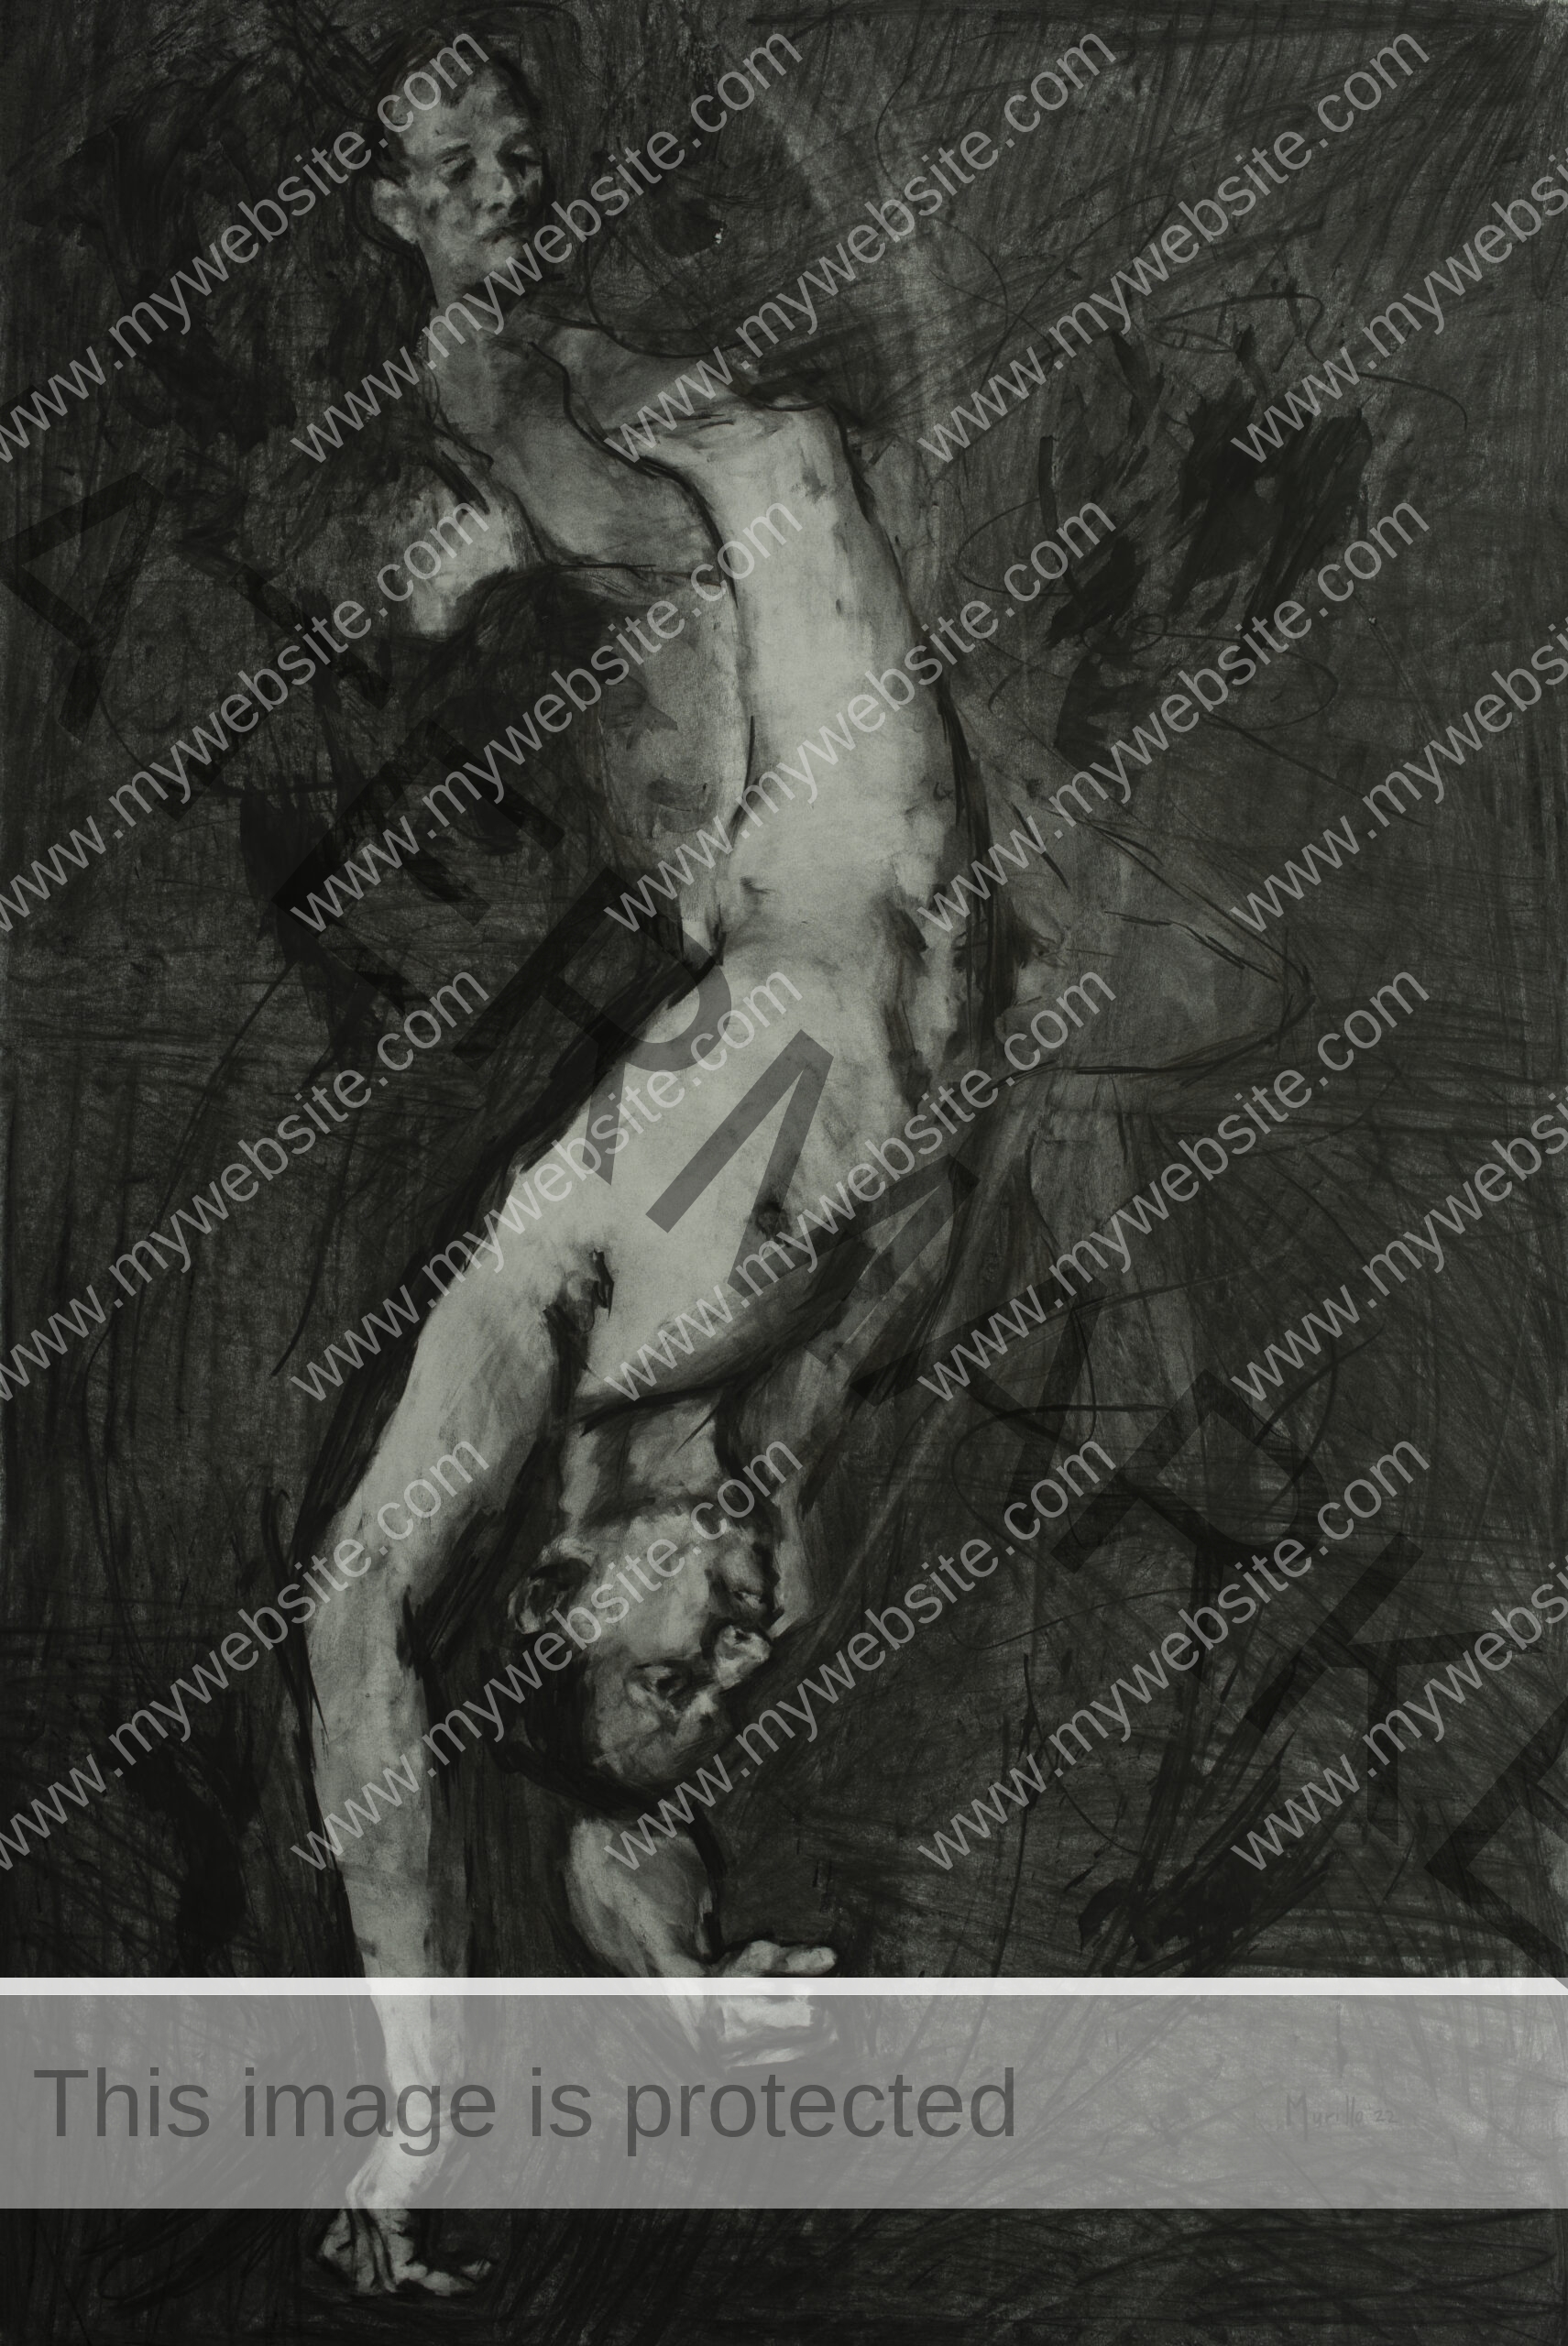 Charcoal drawing from Roberto Murillo's figurative Couplings series, featuring two nude men. One is holding the other upside down. Called "Sinister charcoal artwork"